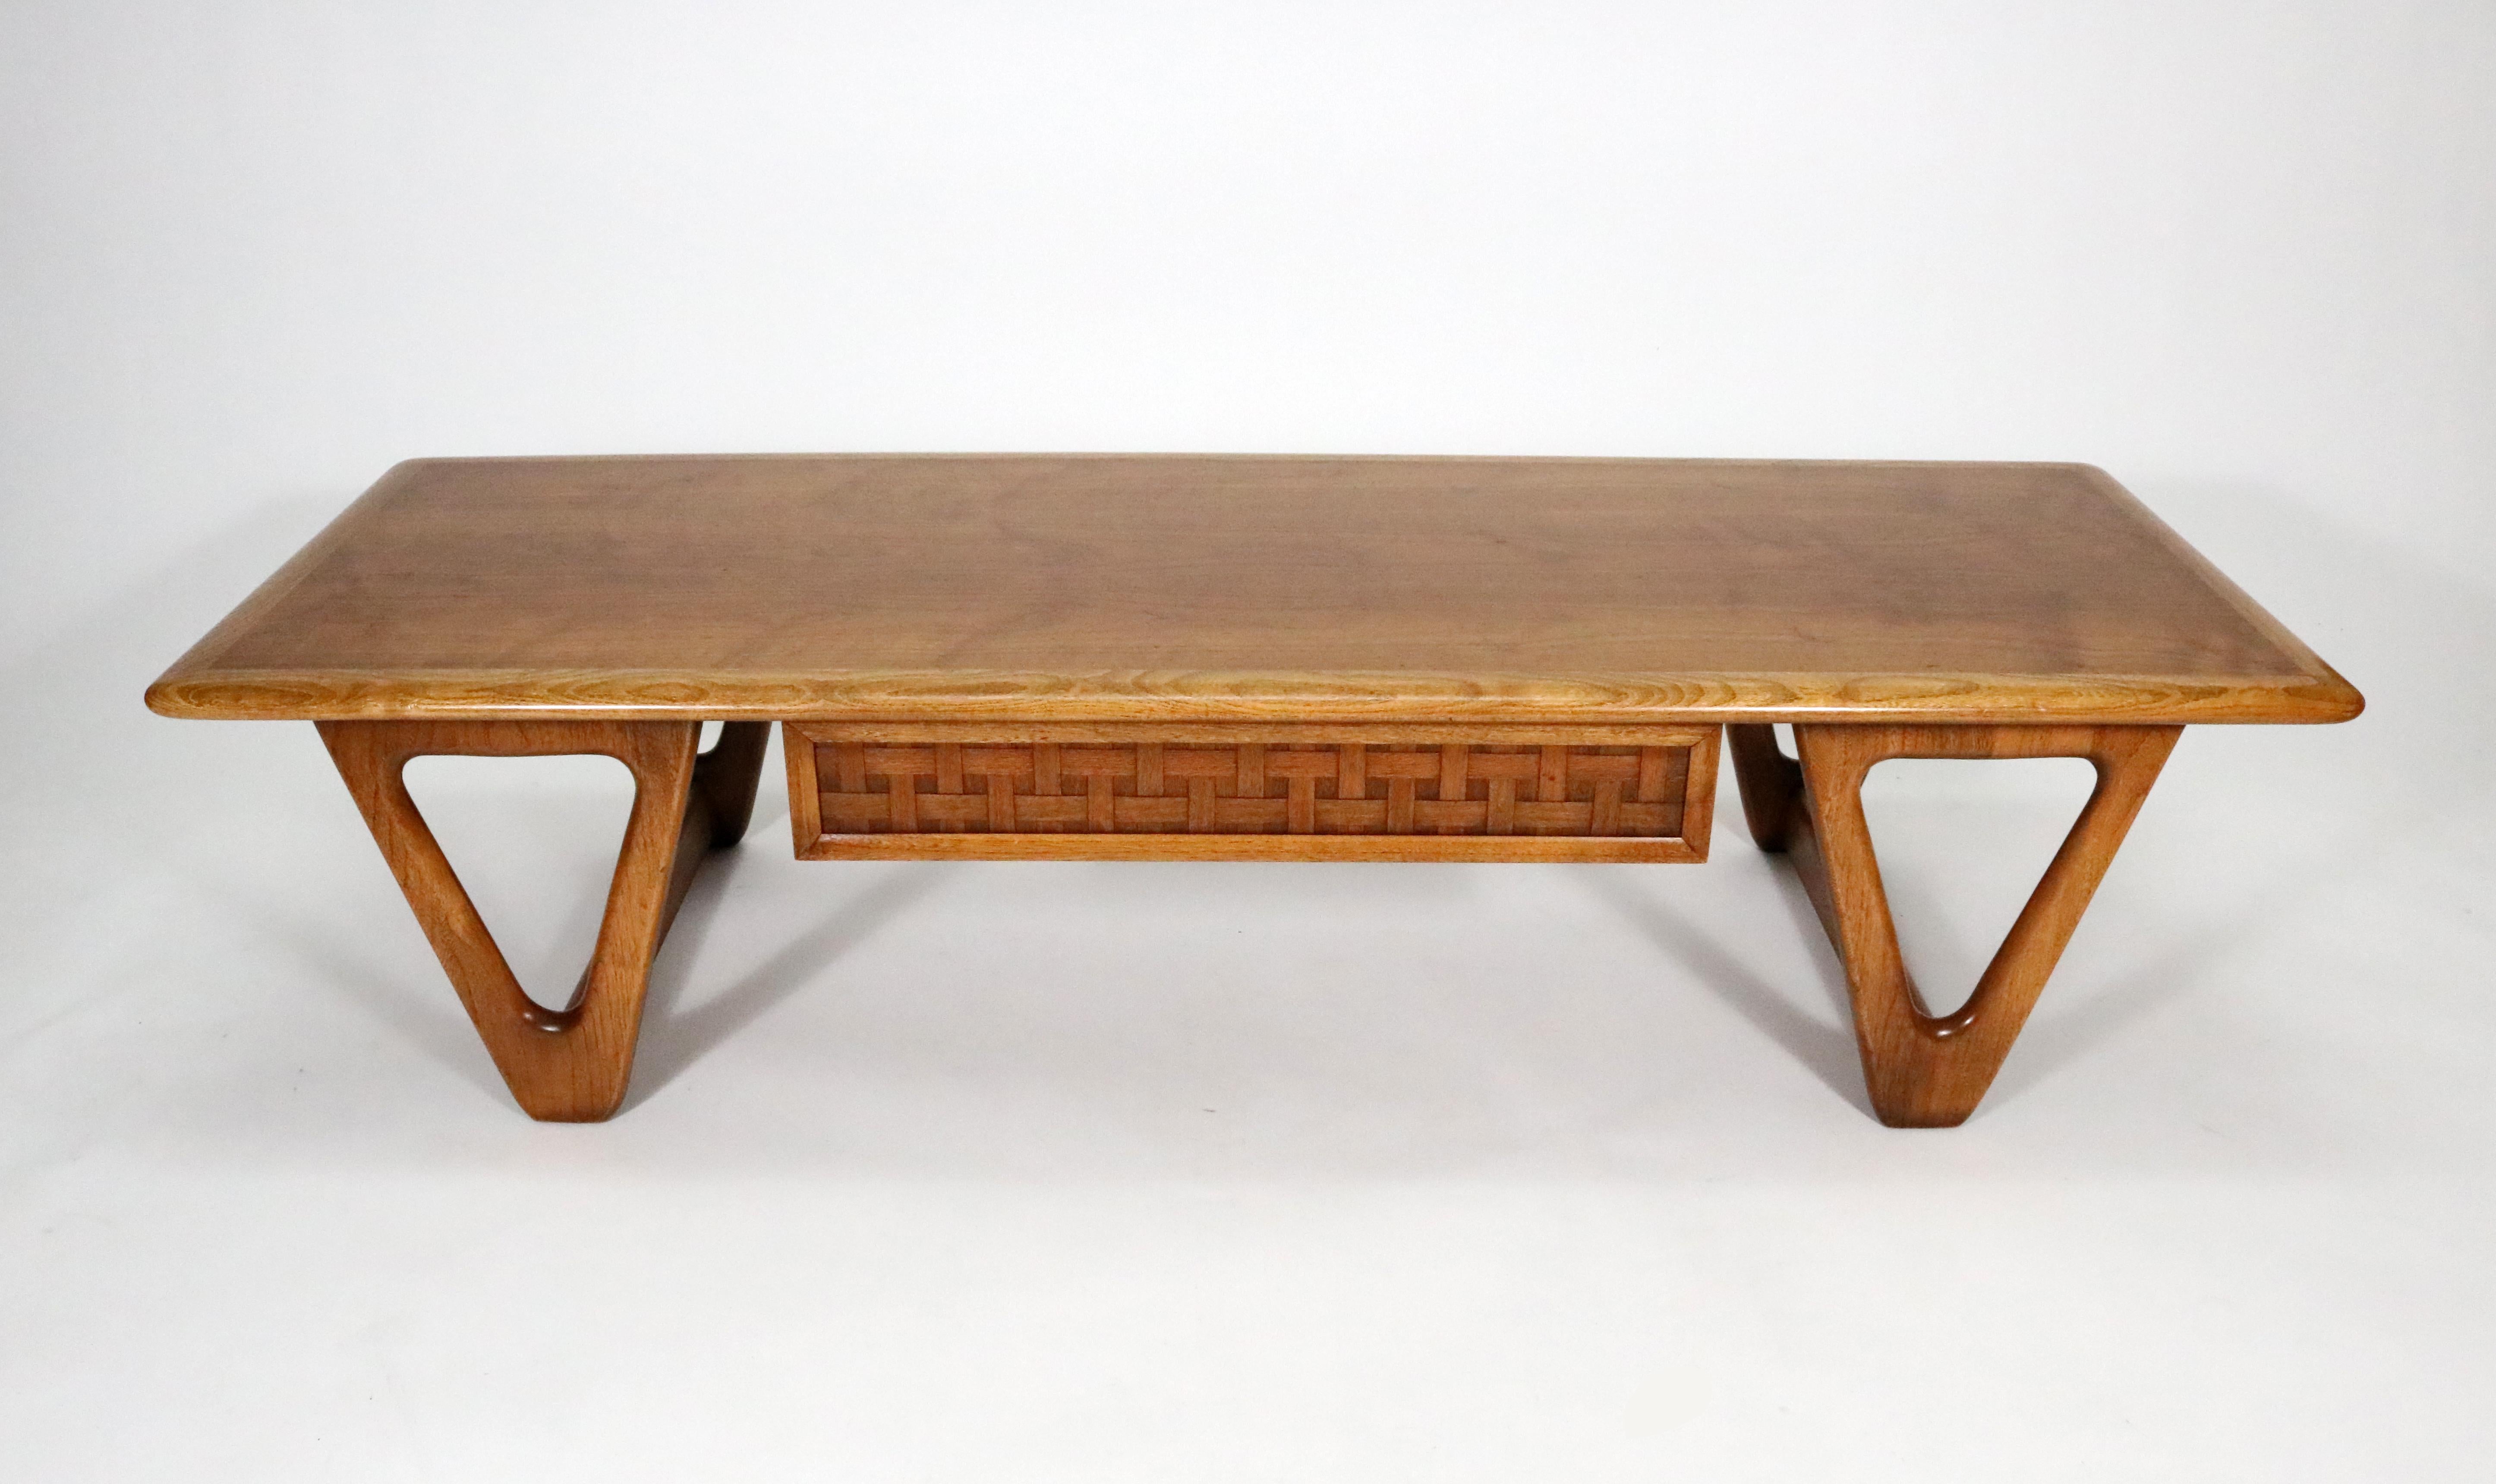 'Perception' walnut coffee table with lattice-front drawer and triangle legs by Warren Church for Lane.